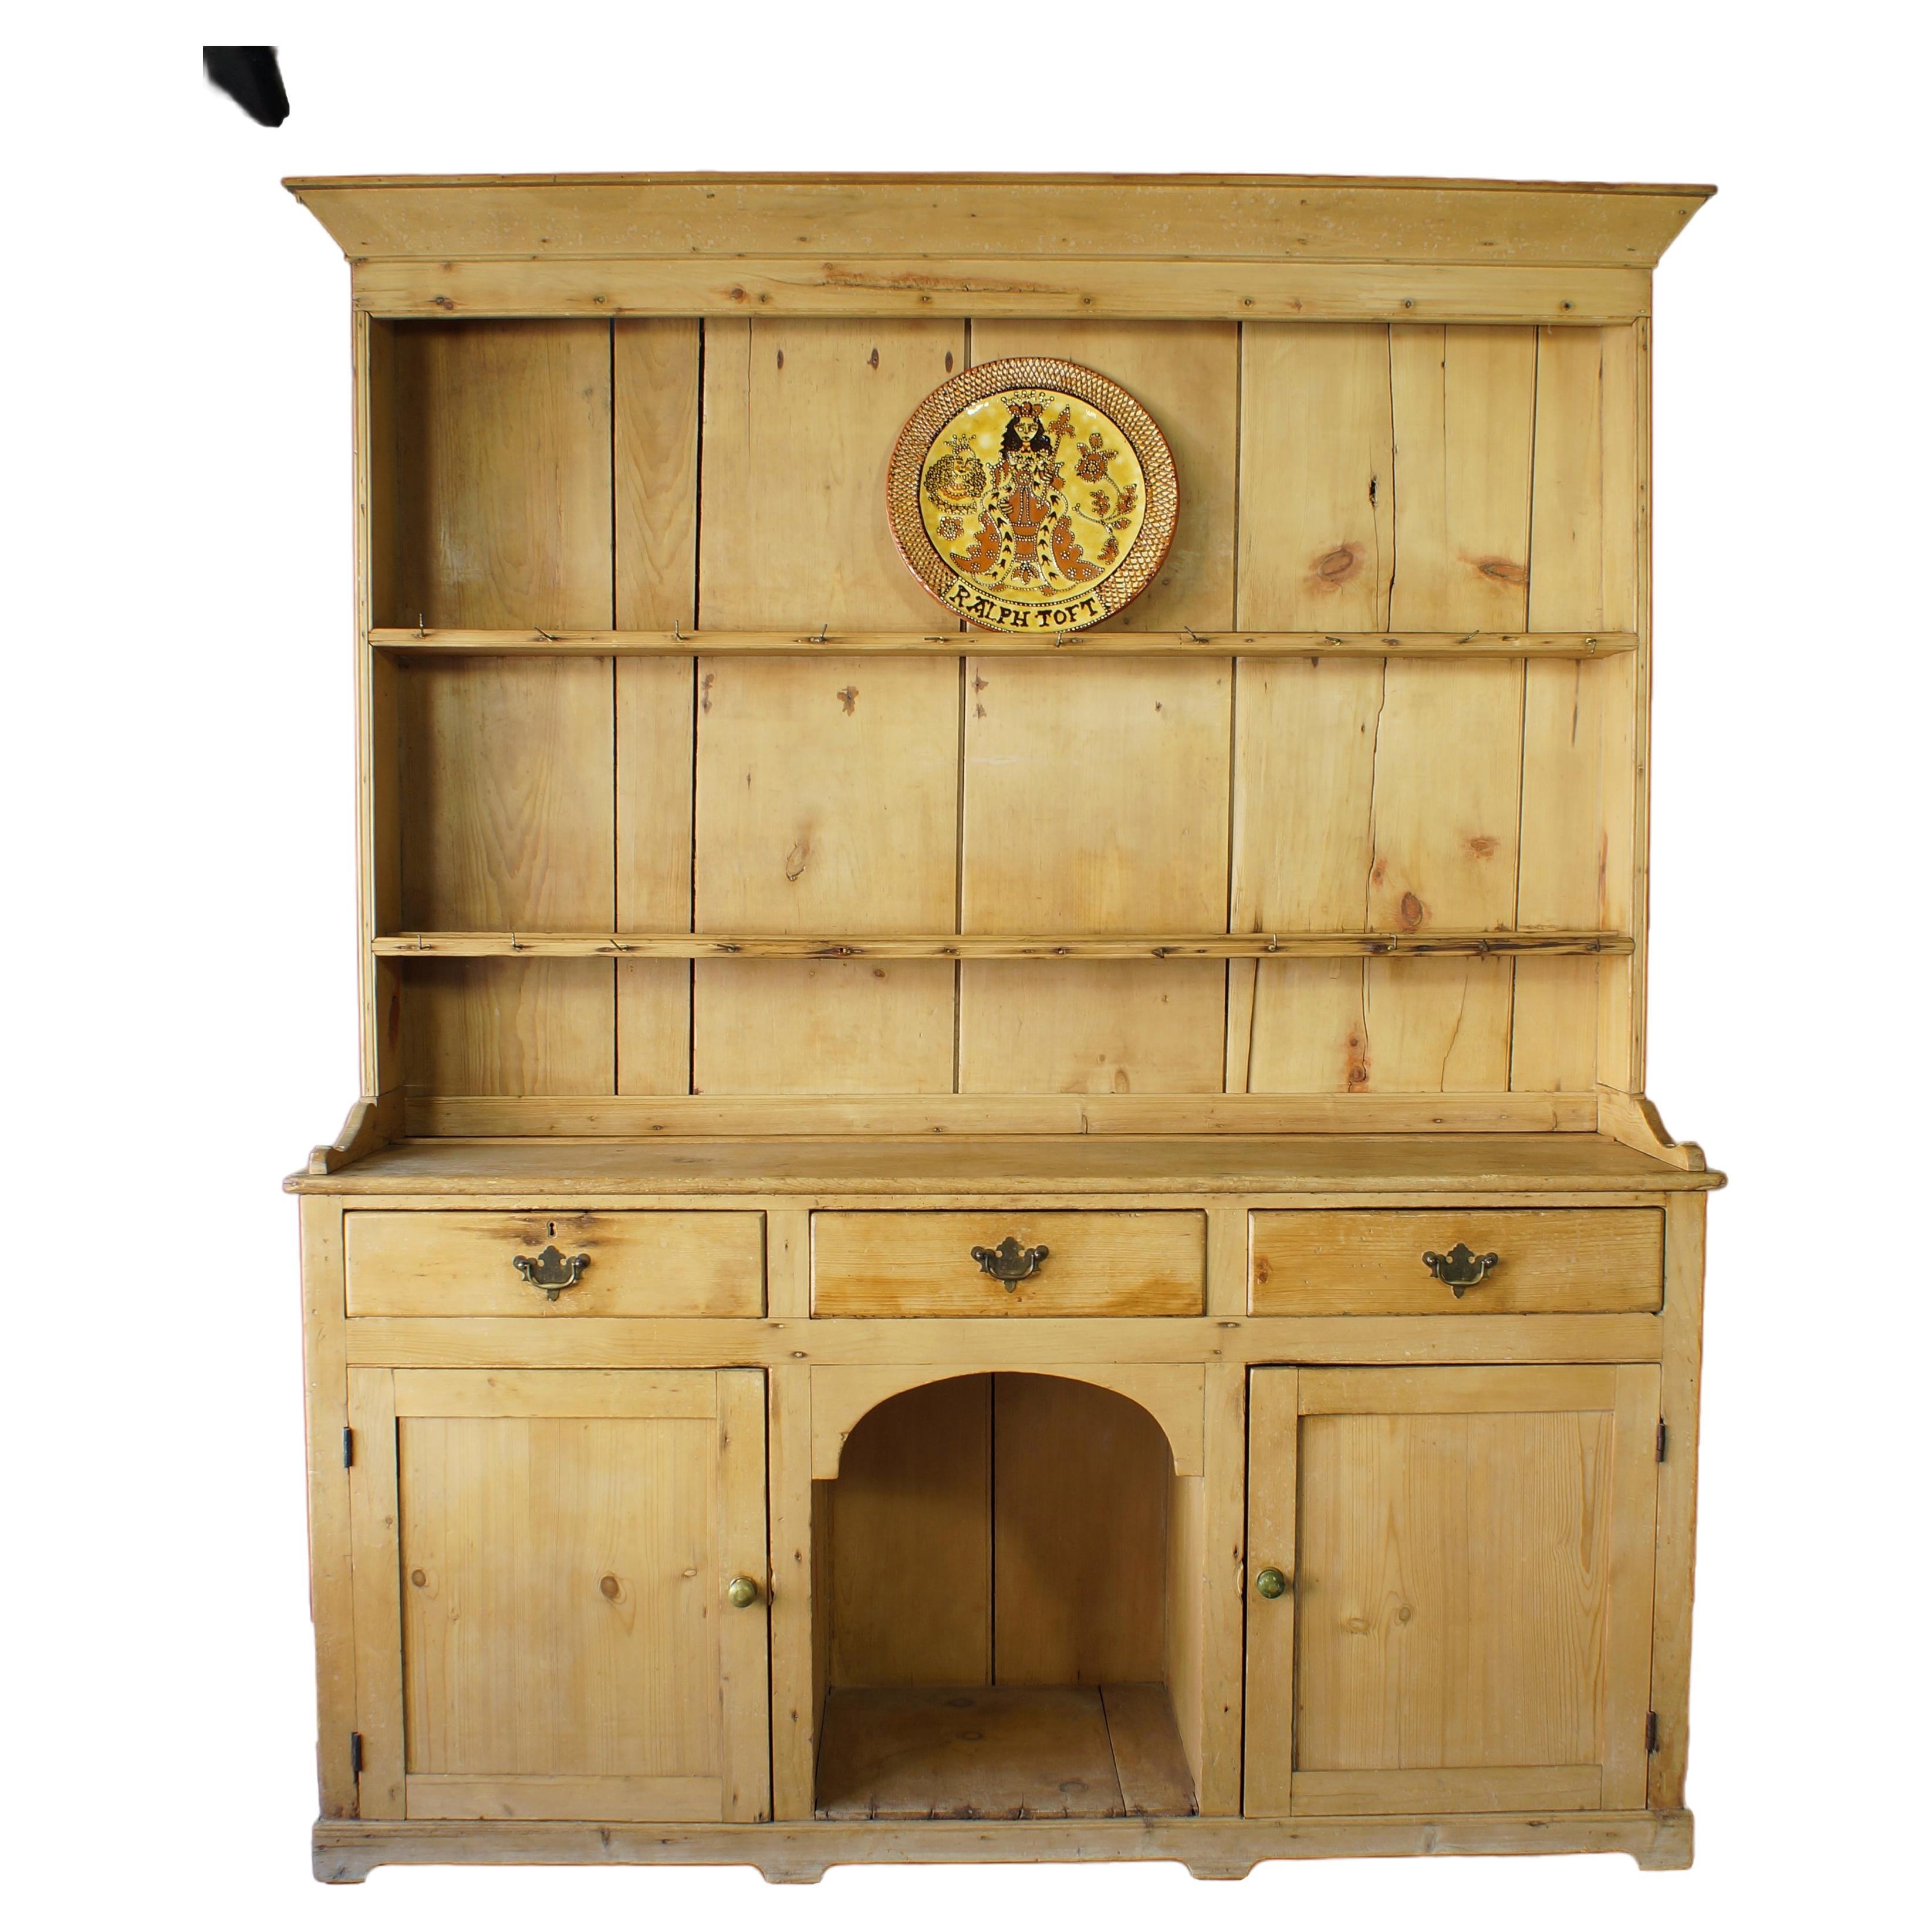 What do you display on a Welsh dresser?